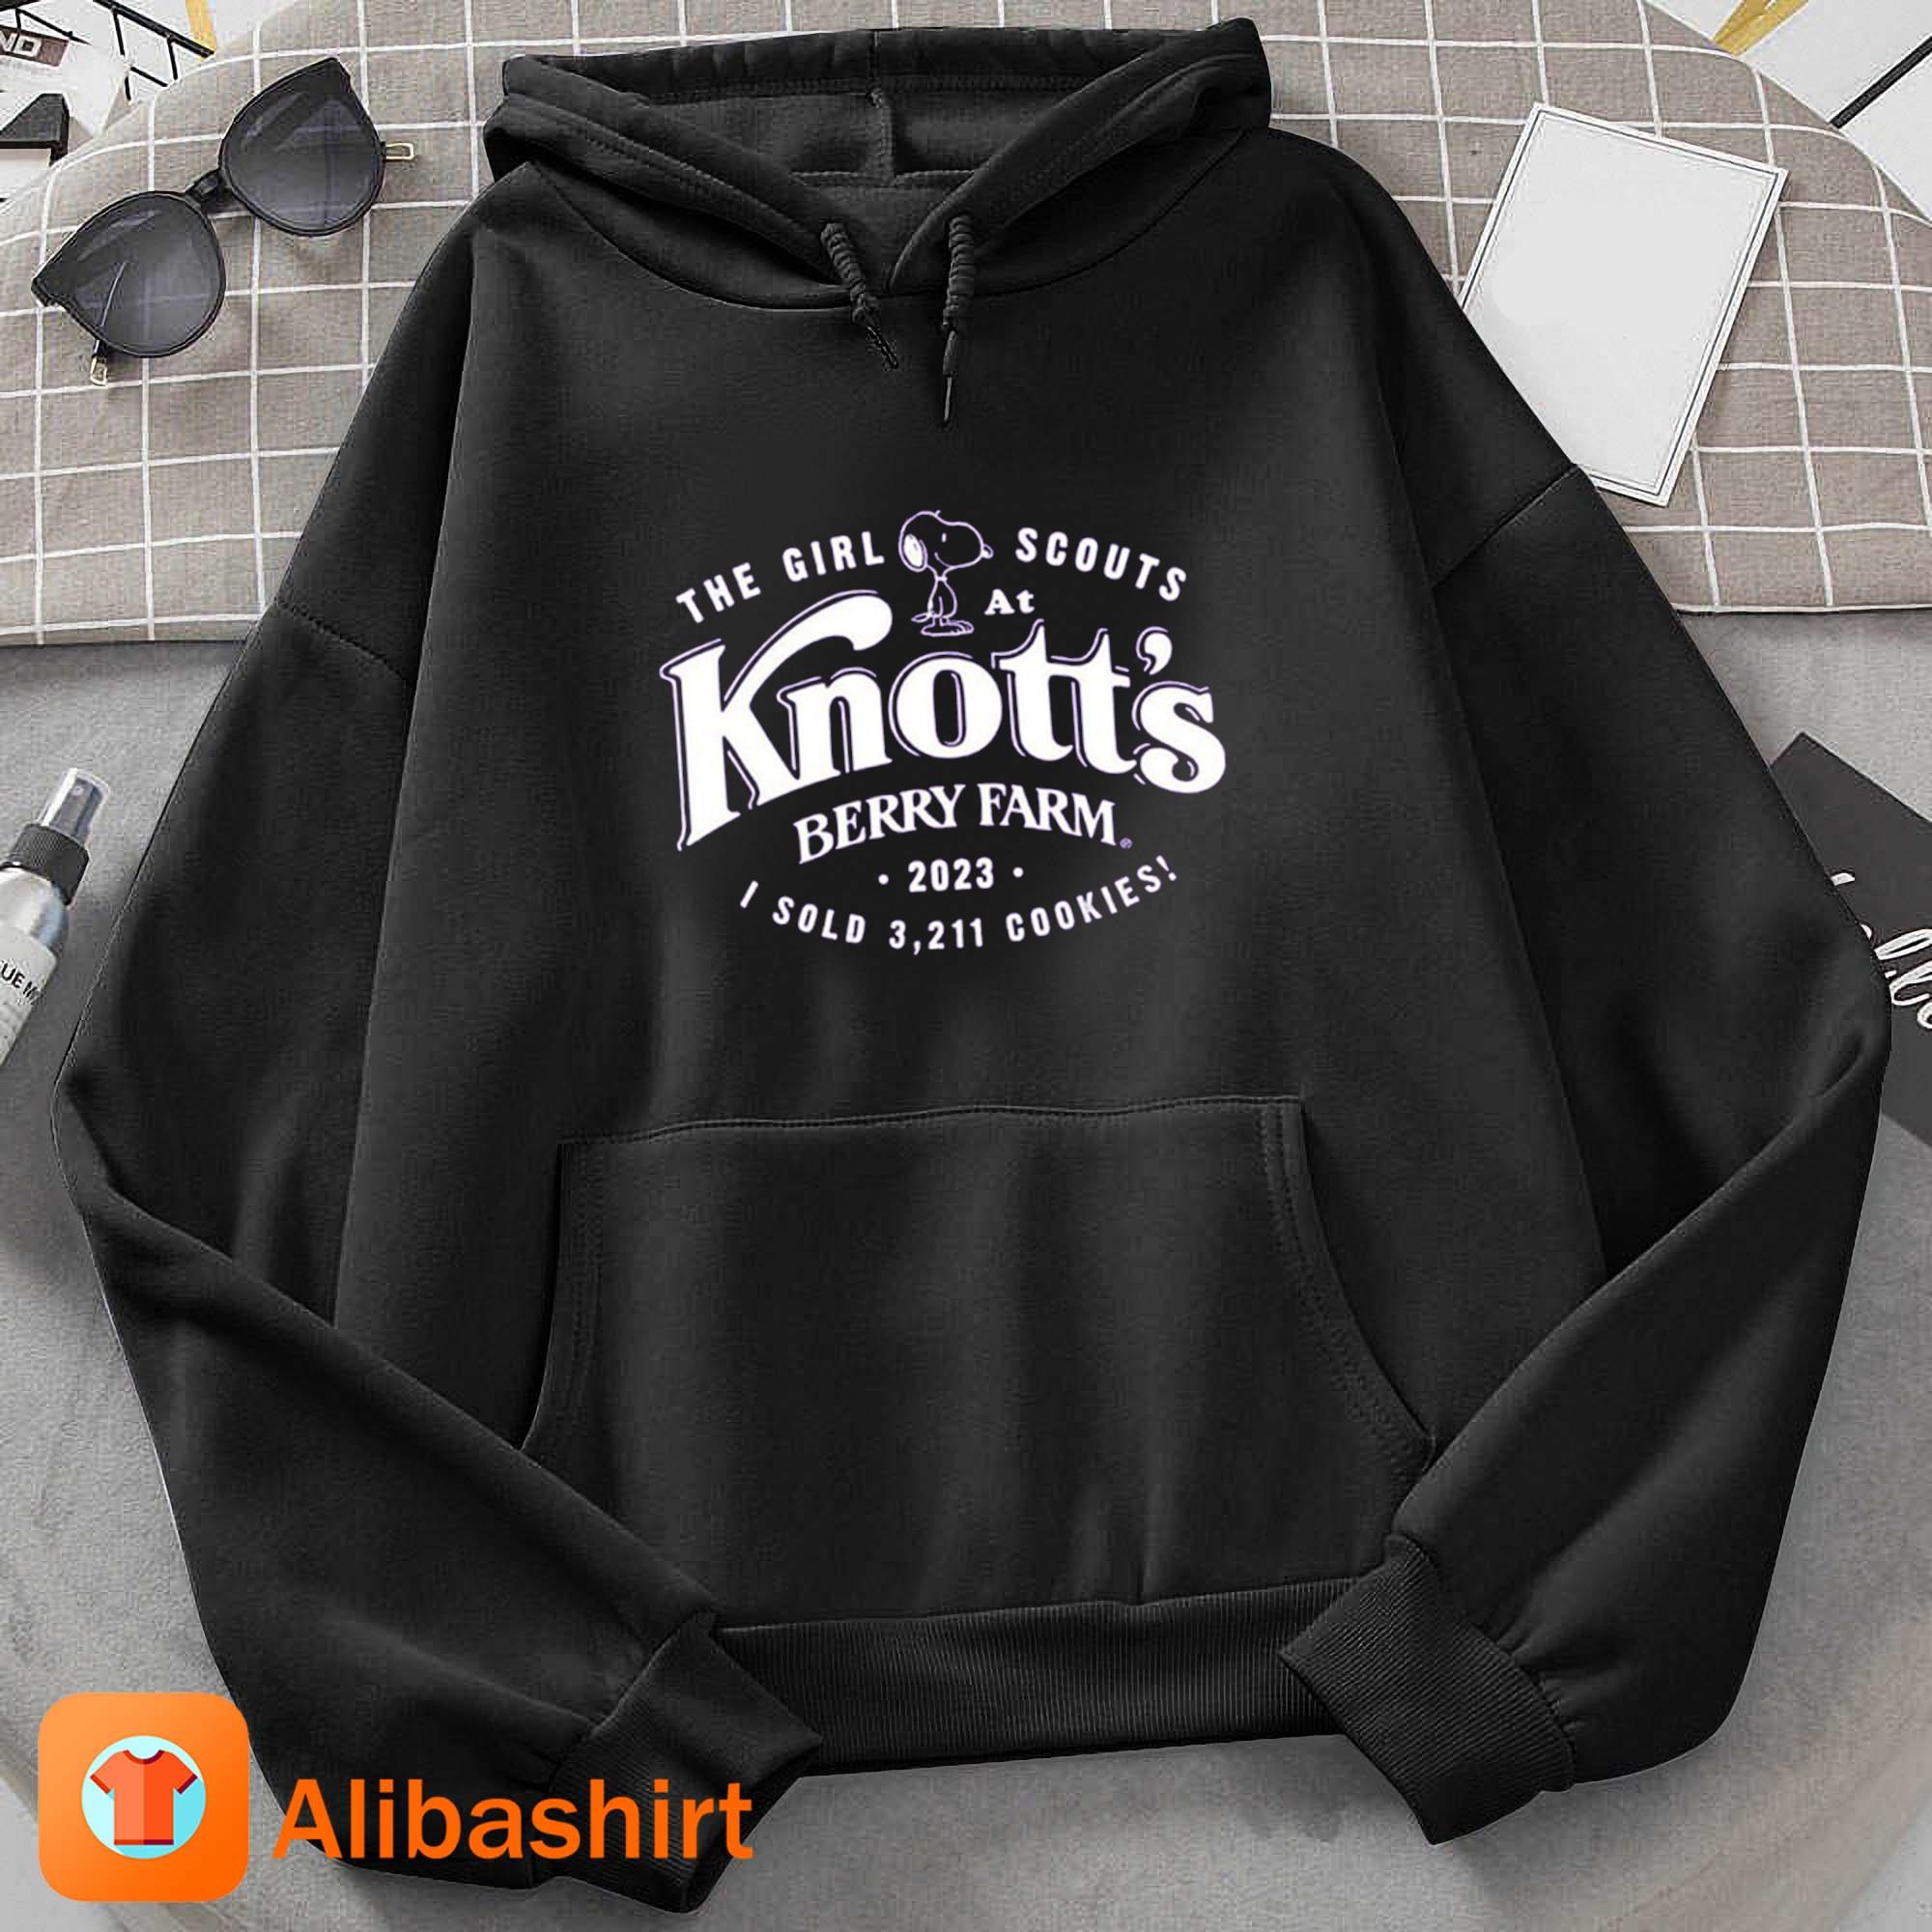 The Girl Scouts Knott's Berry Farm 2023 Shirt Hoodie